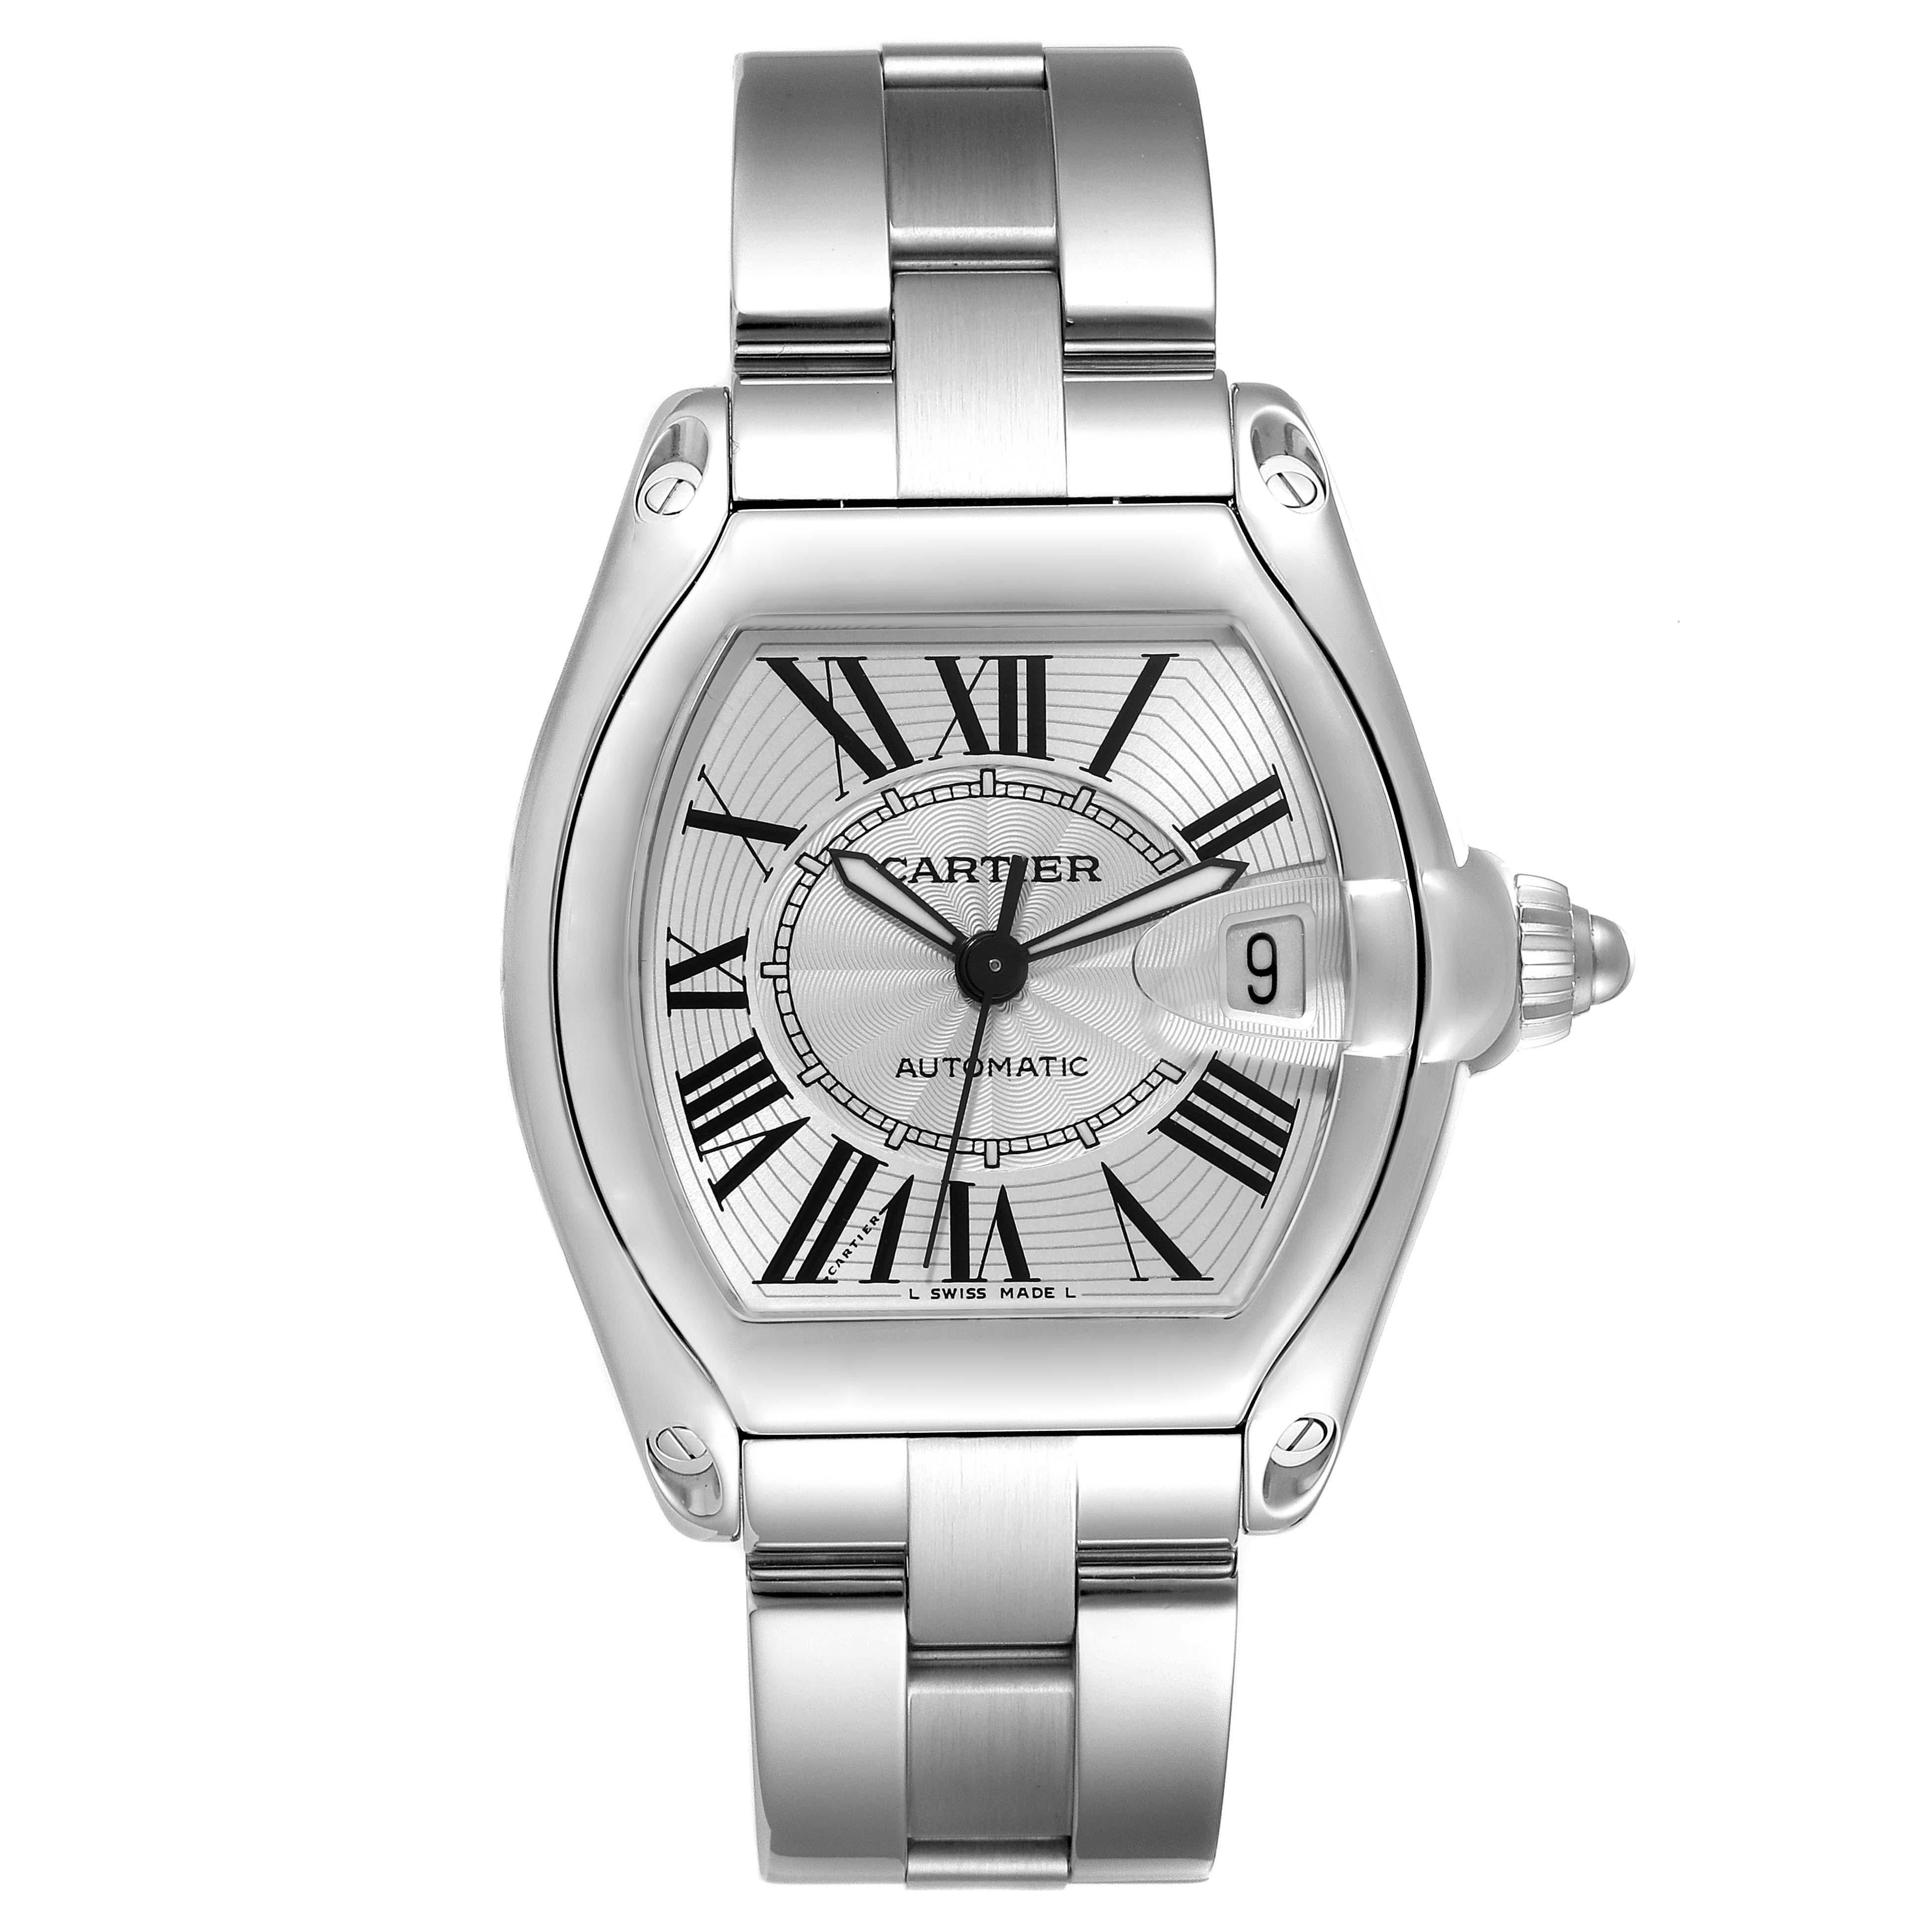 Cartier Roadster Large Silver Dial Steel Mens Watch W62025V3. Automatic self-winding movement. Stainless steel tonneau shaped case 38 x 43 mm. . Scratch resistant sapphire crystal with cyclops magnifying glass. Silver dial with black Roman numerals.